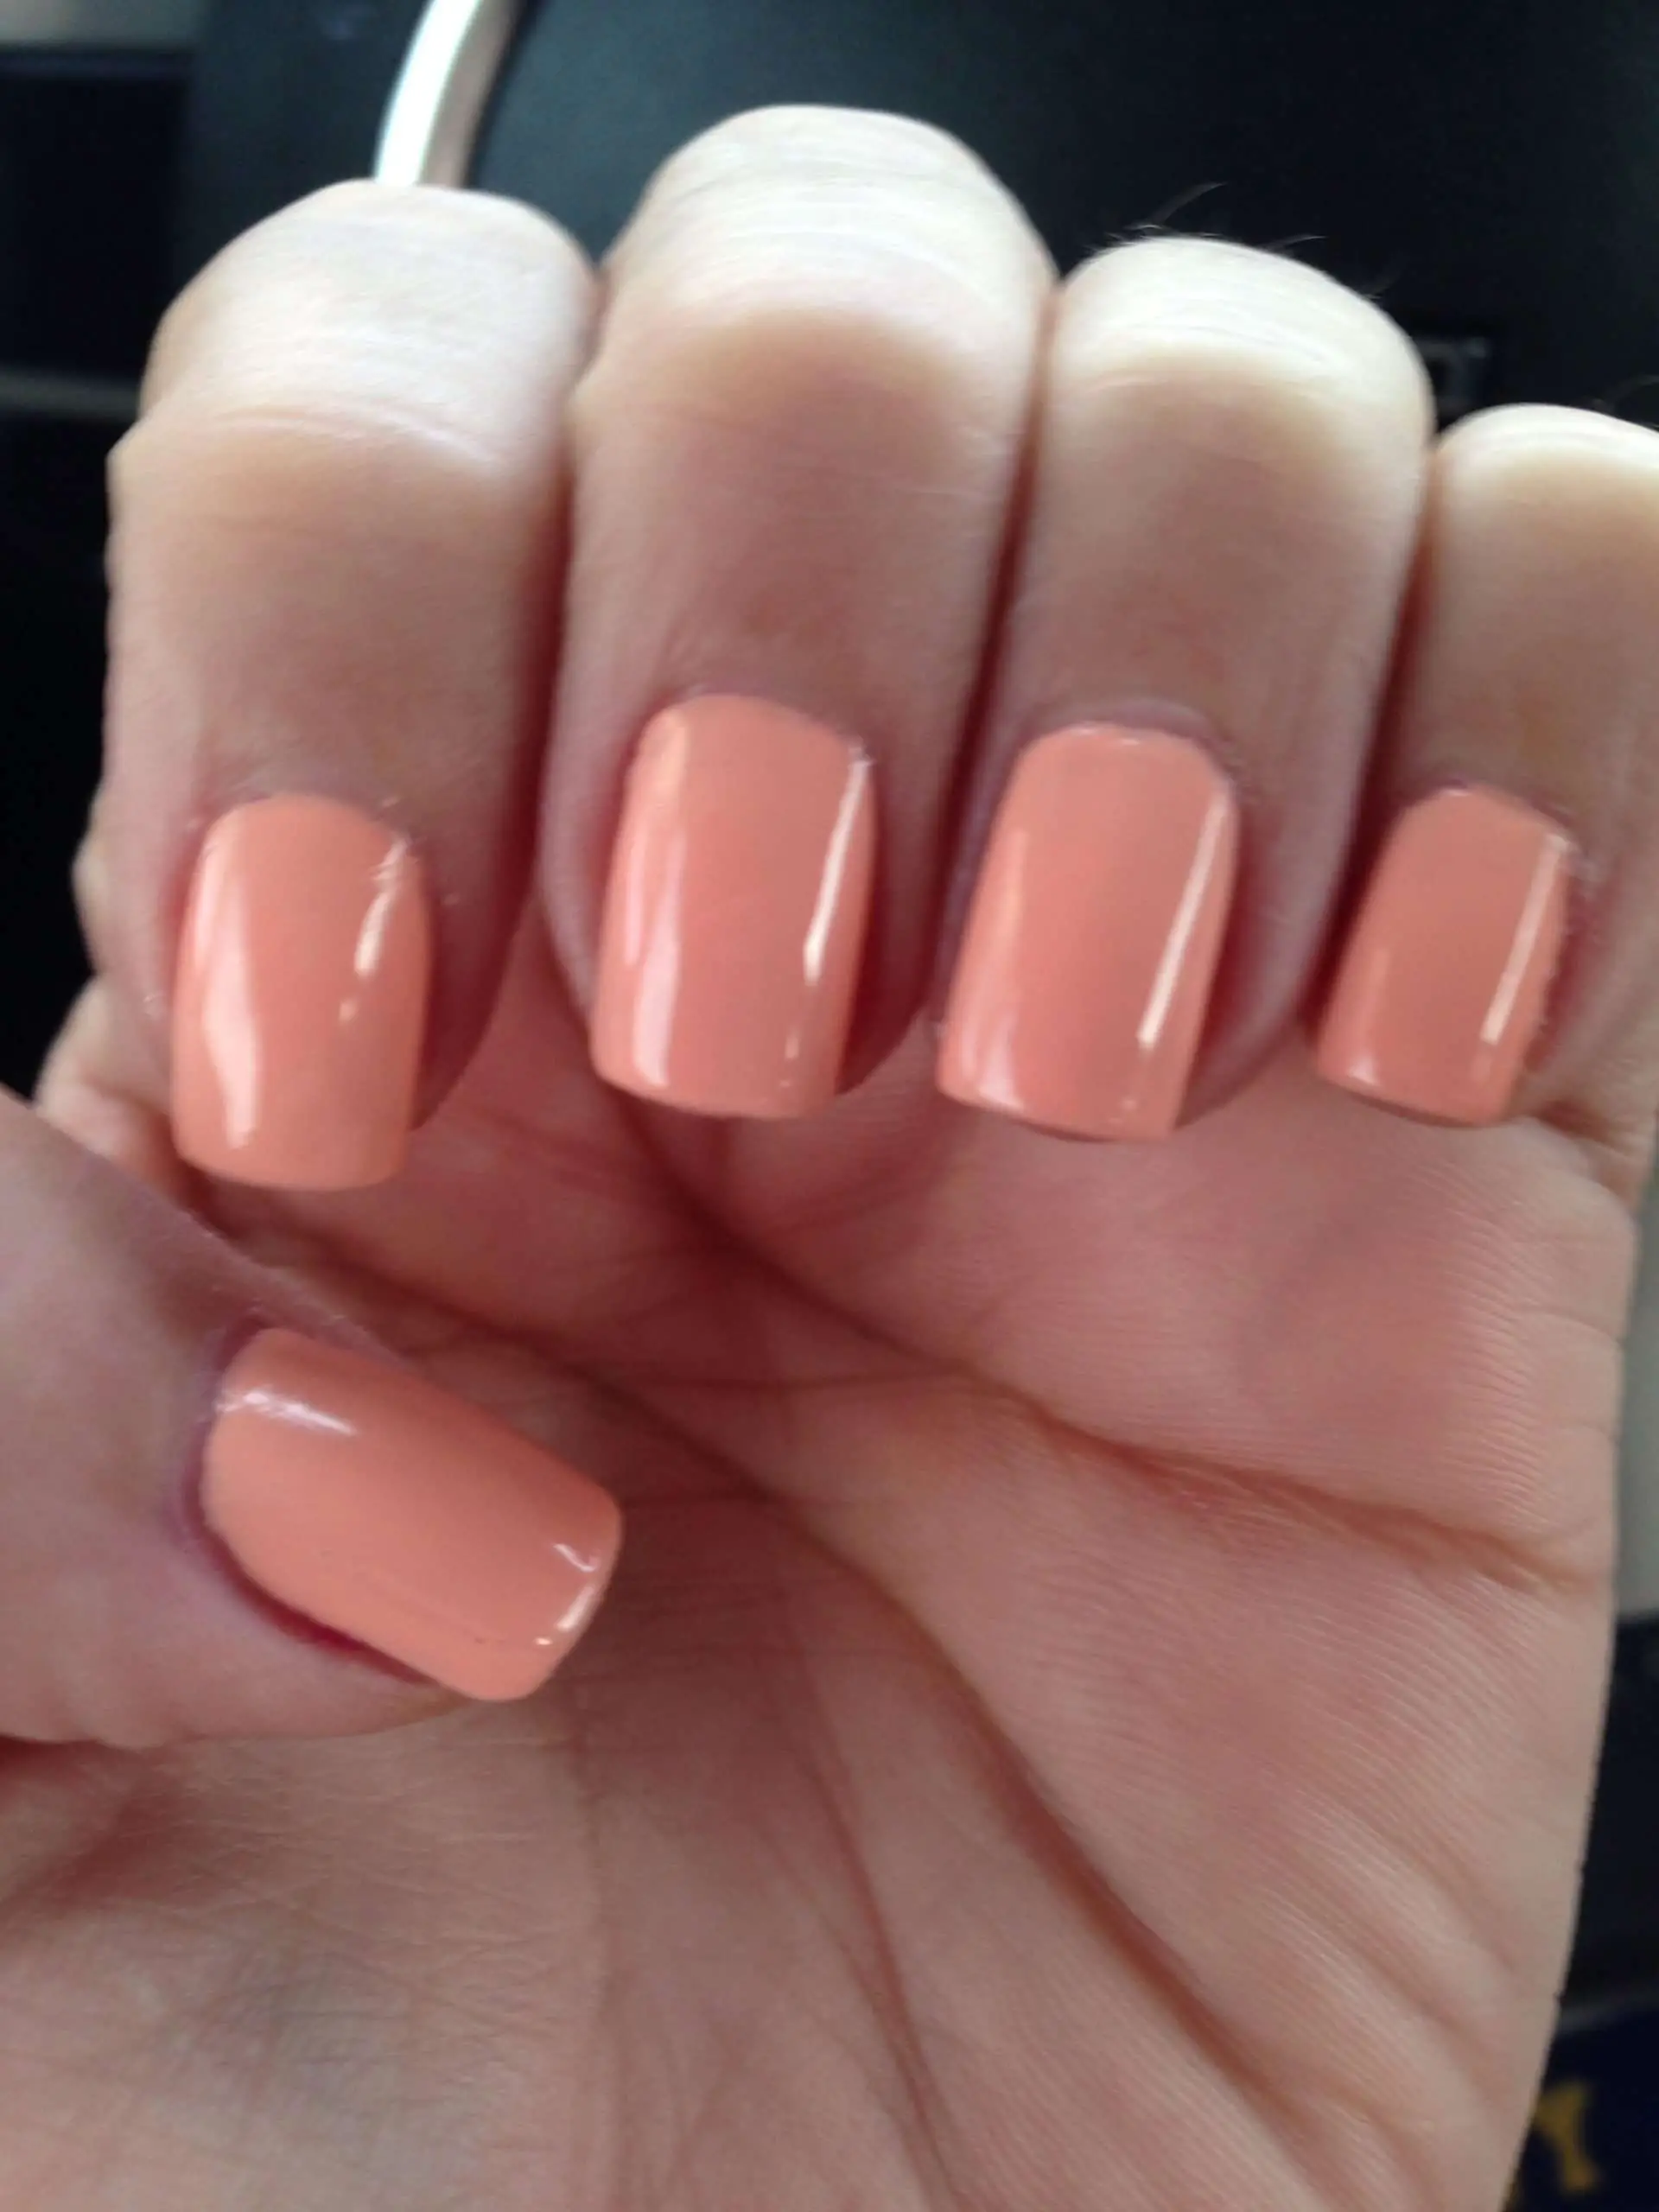 My natural nails. Love this color :)